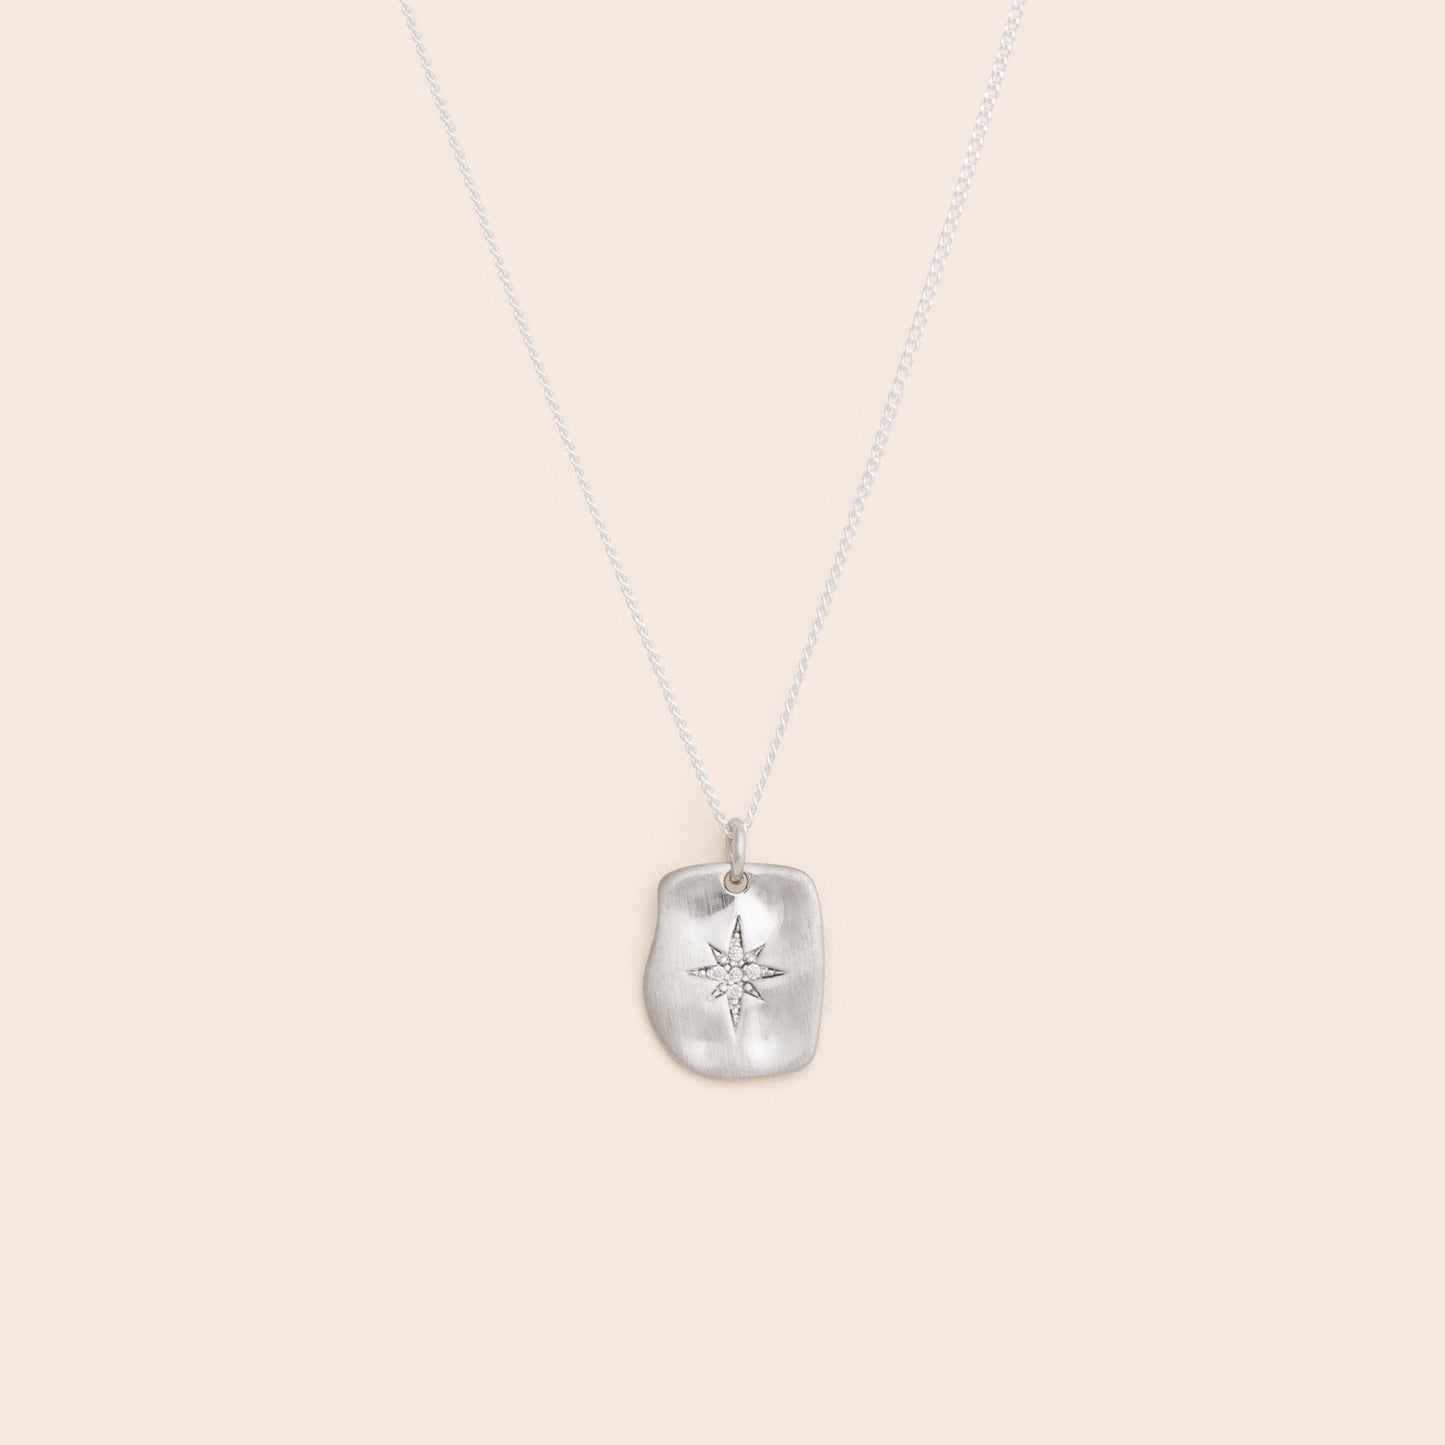 Northern Star Tag Necklace - Sterling Silver - Gemlet